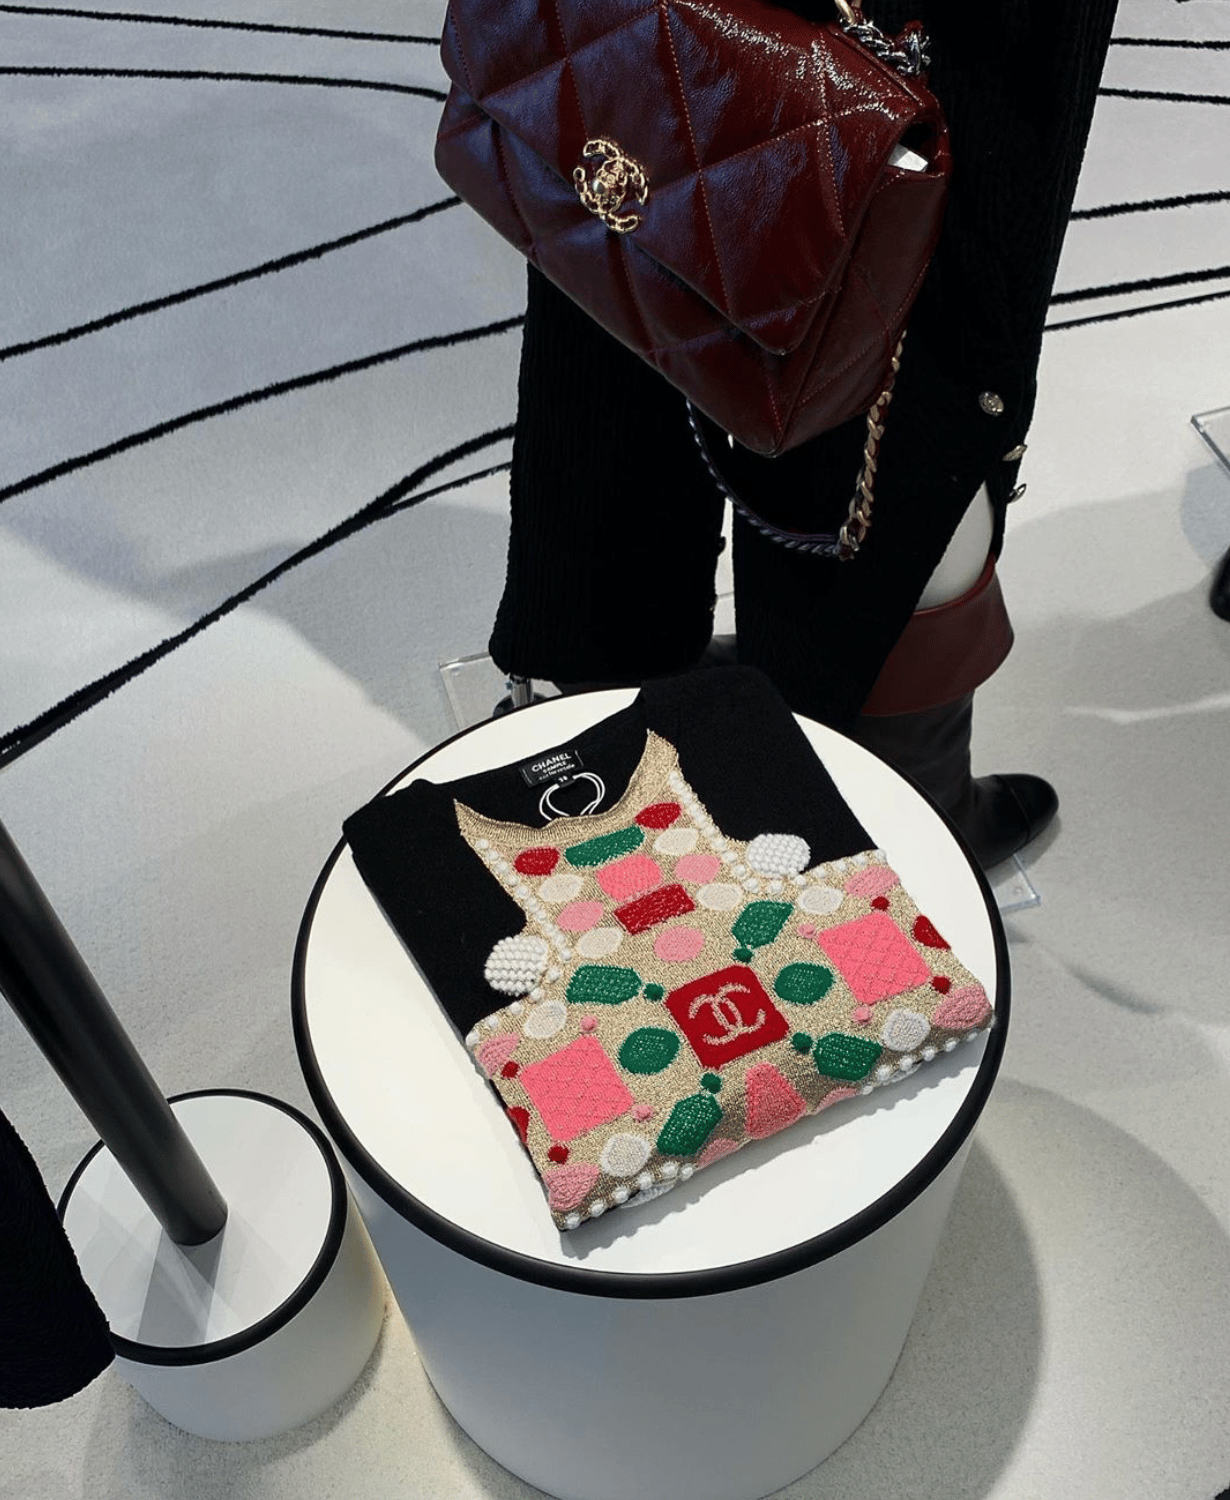 Chanel Fall Winter 2020/21 Collection- New Bags & Shoes + Louis